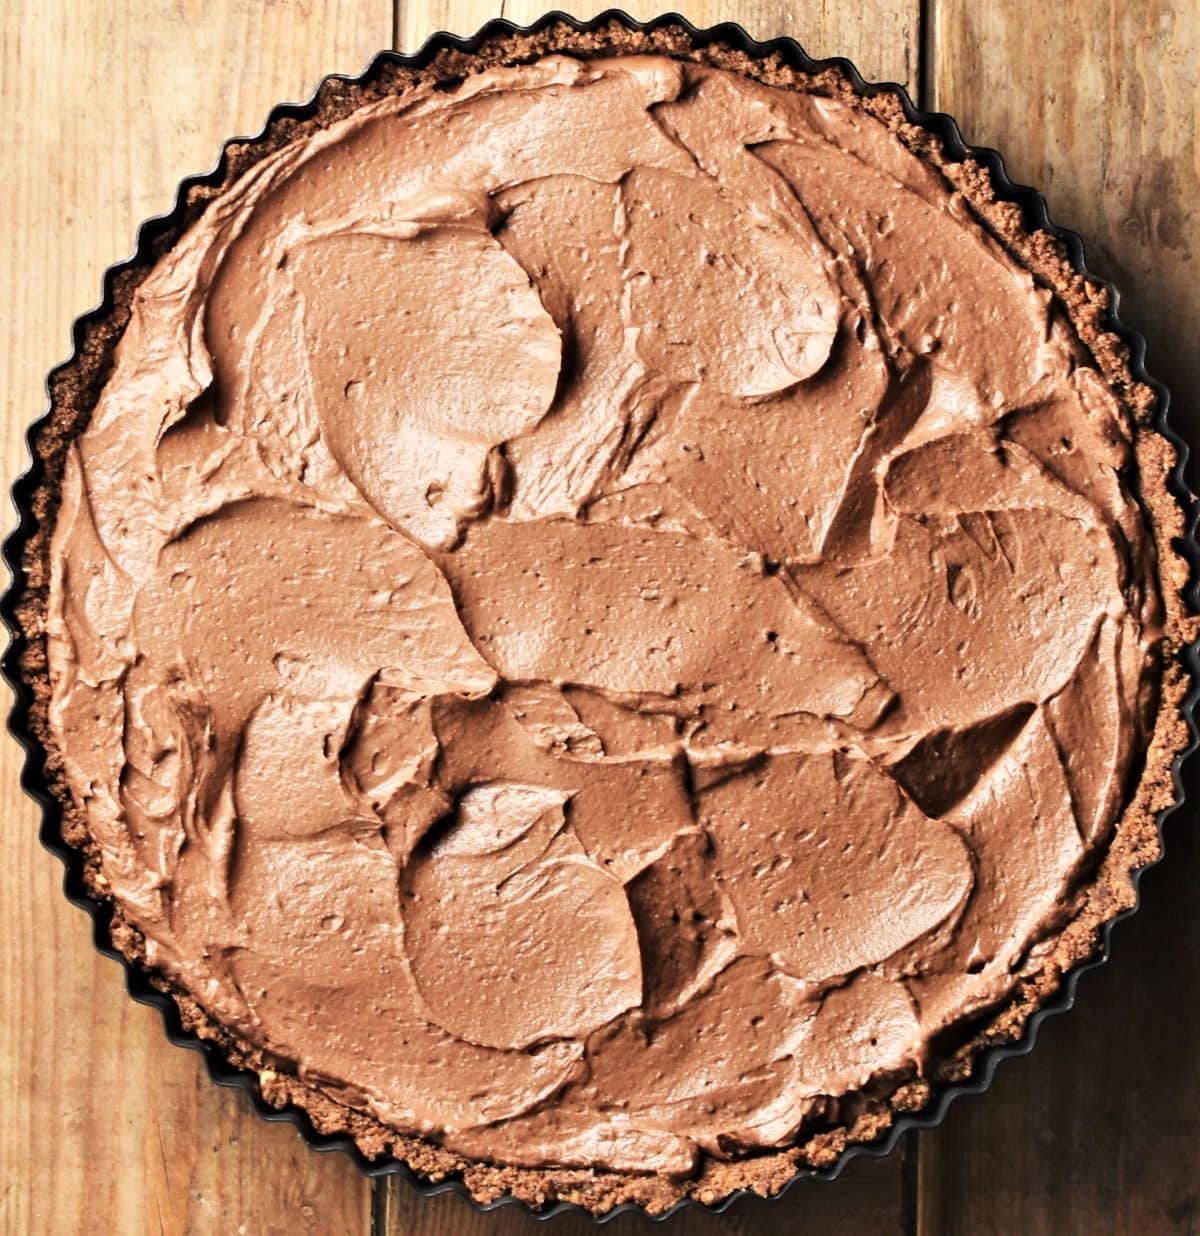 Tart with chocolate filling in round pan.